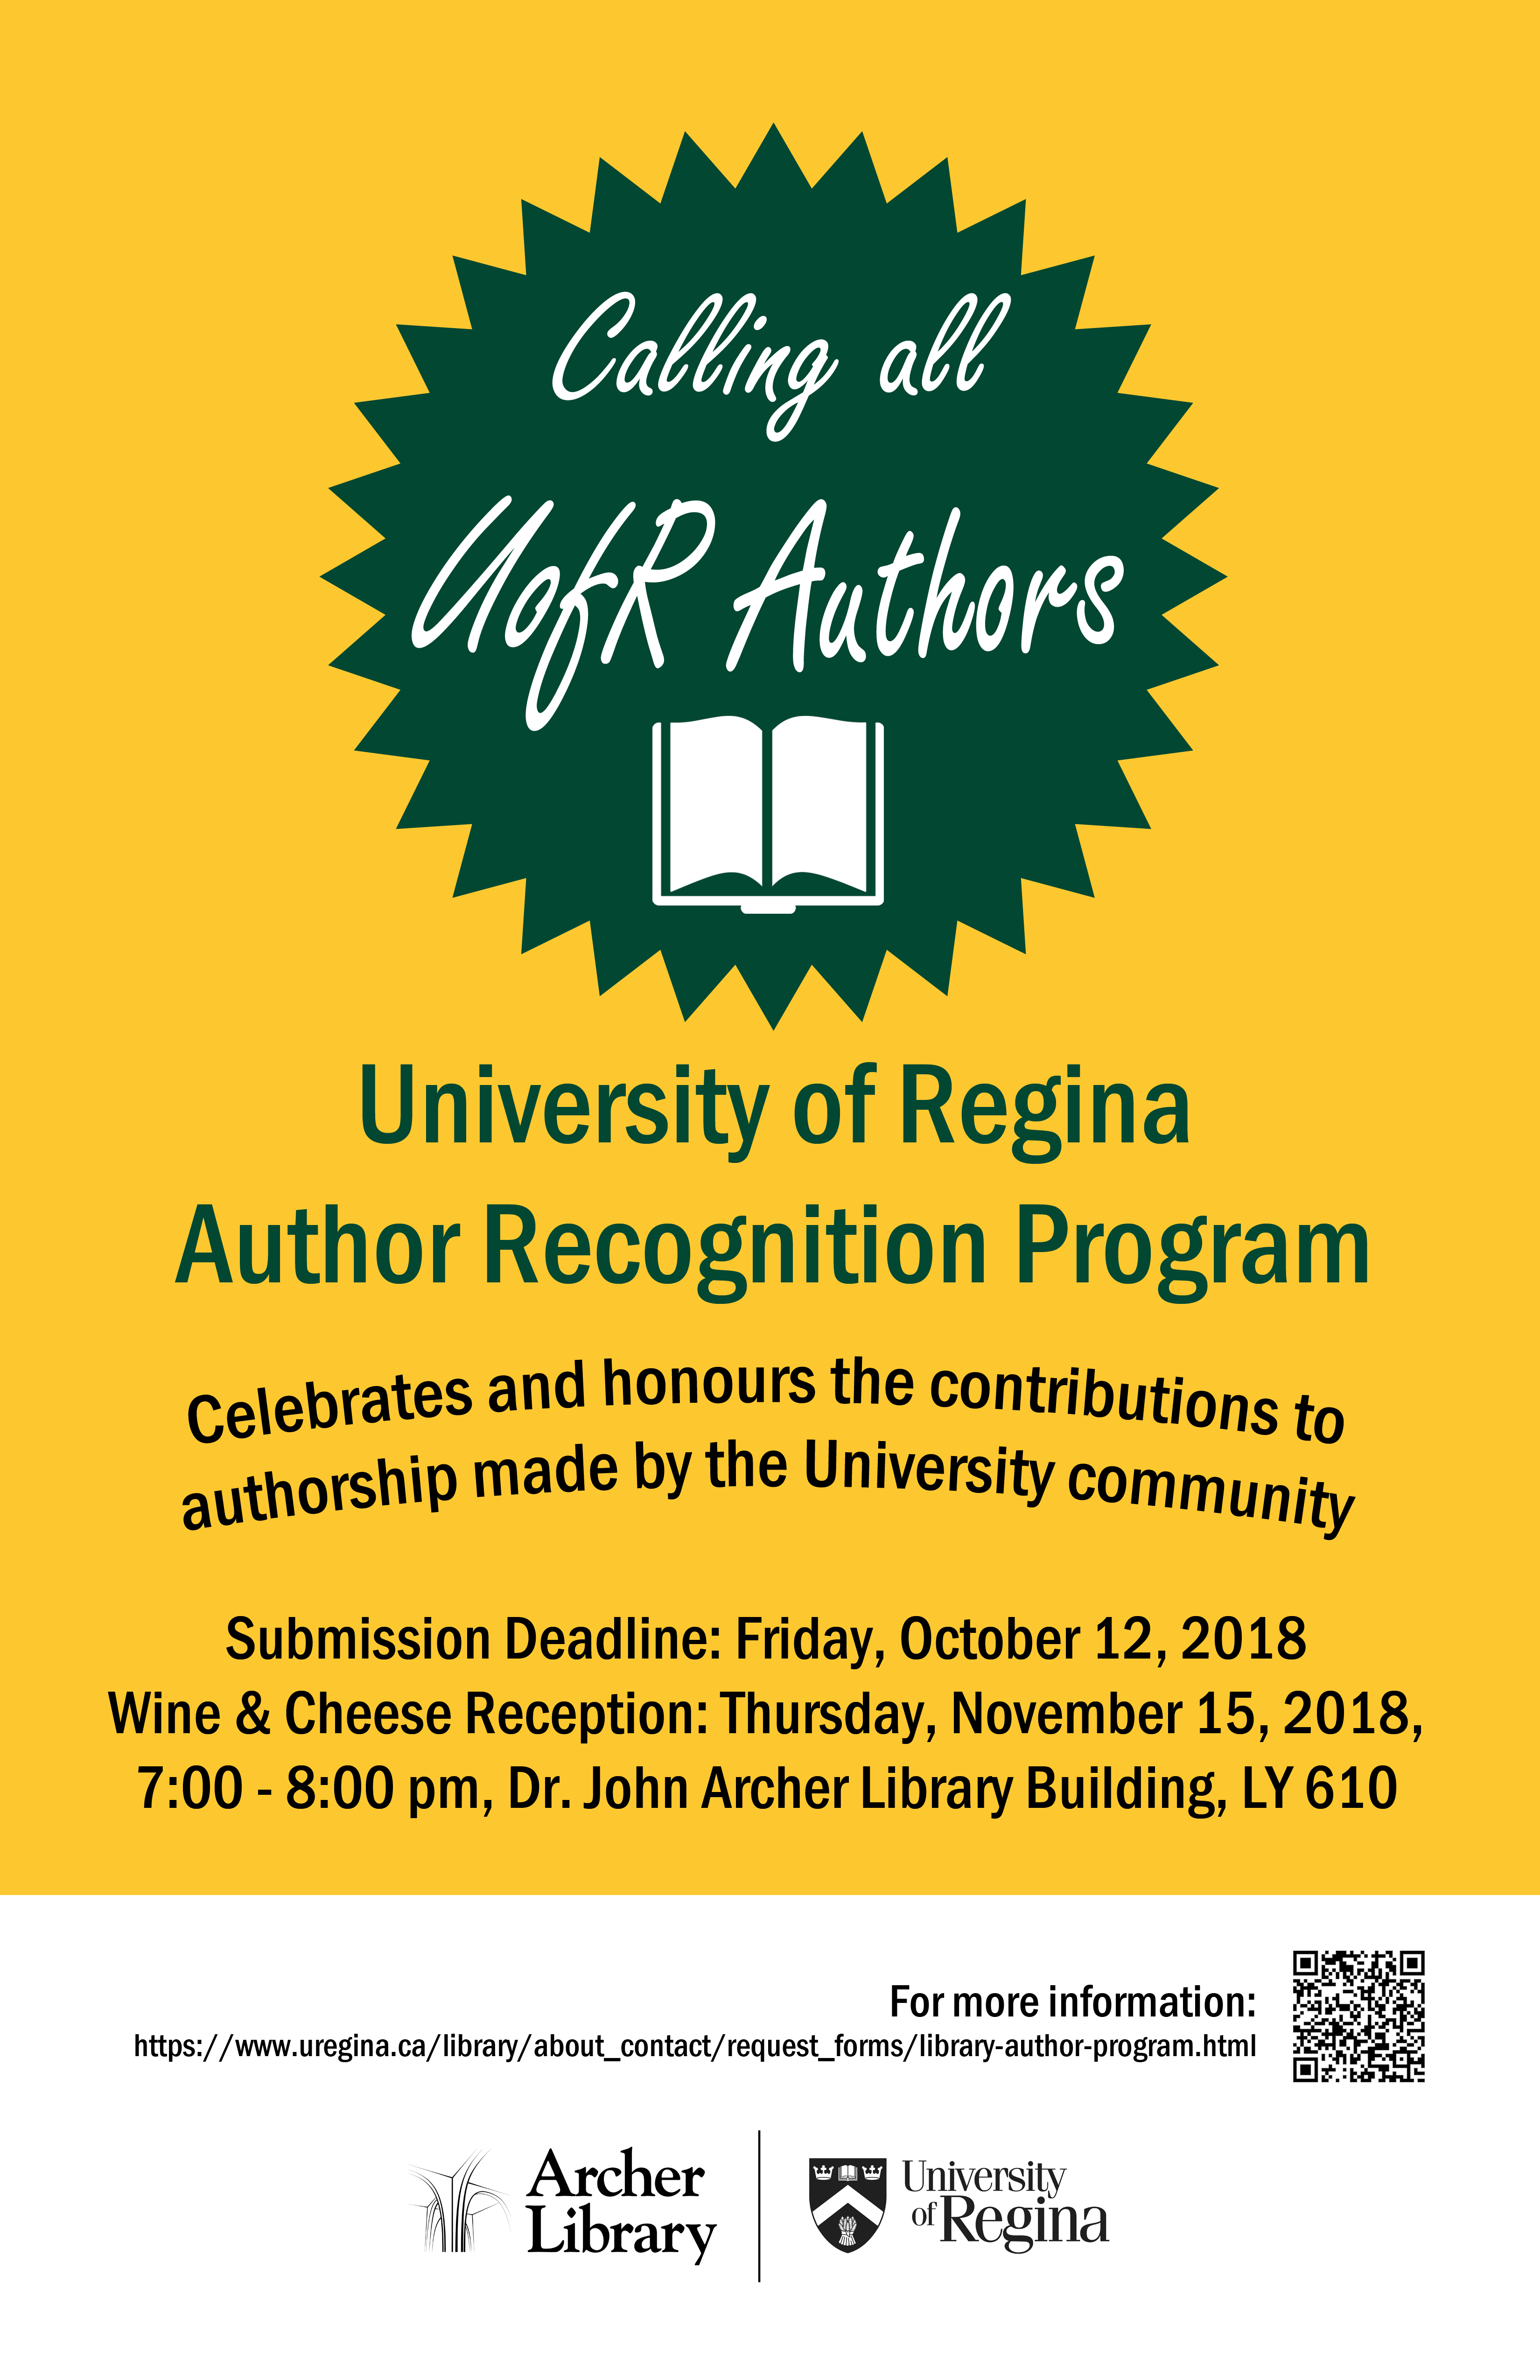 Annual Author Recognition Event